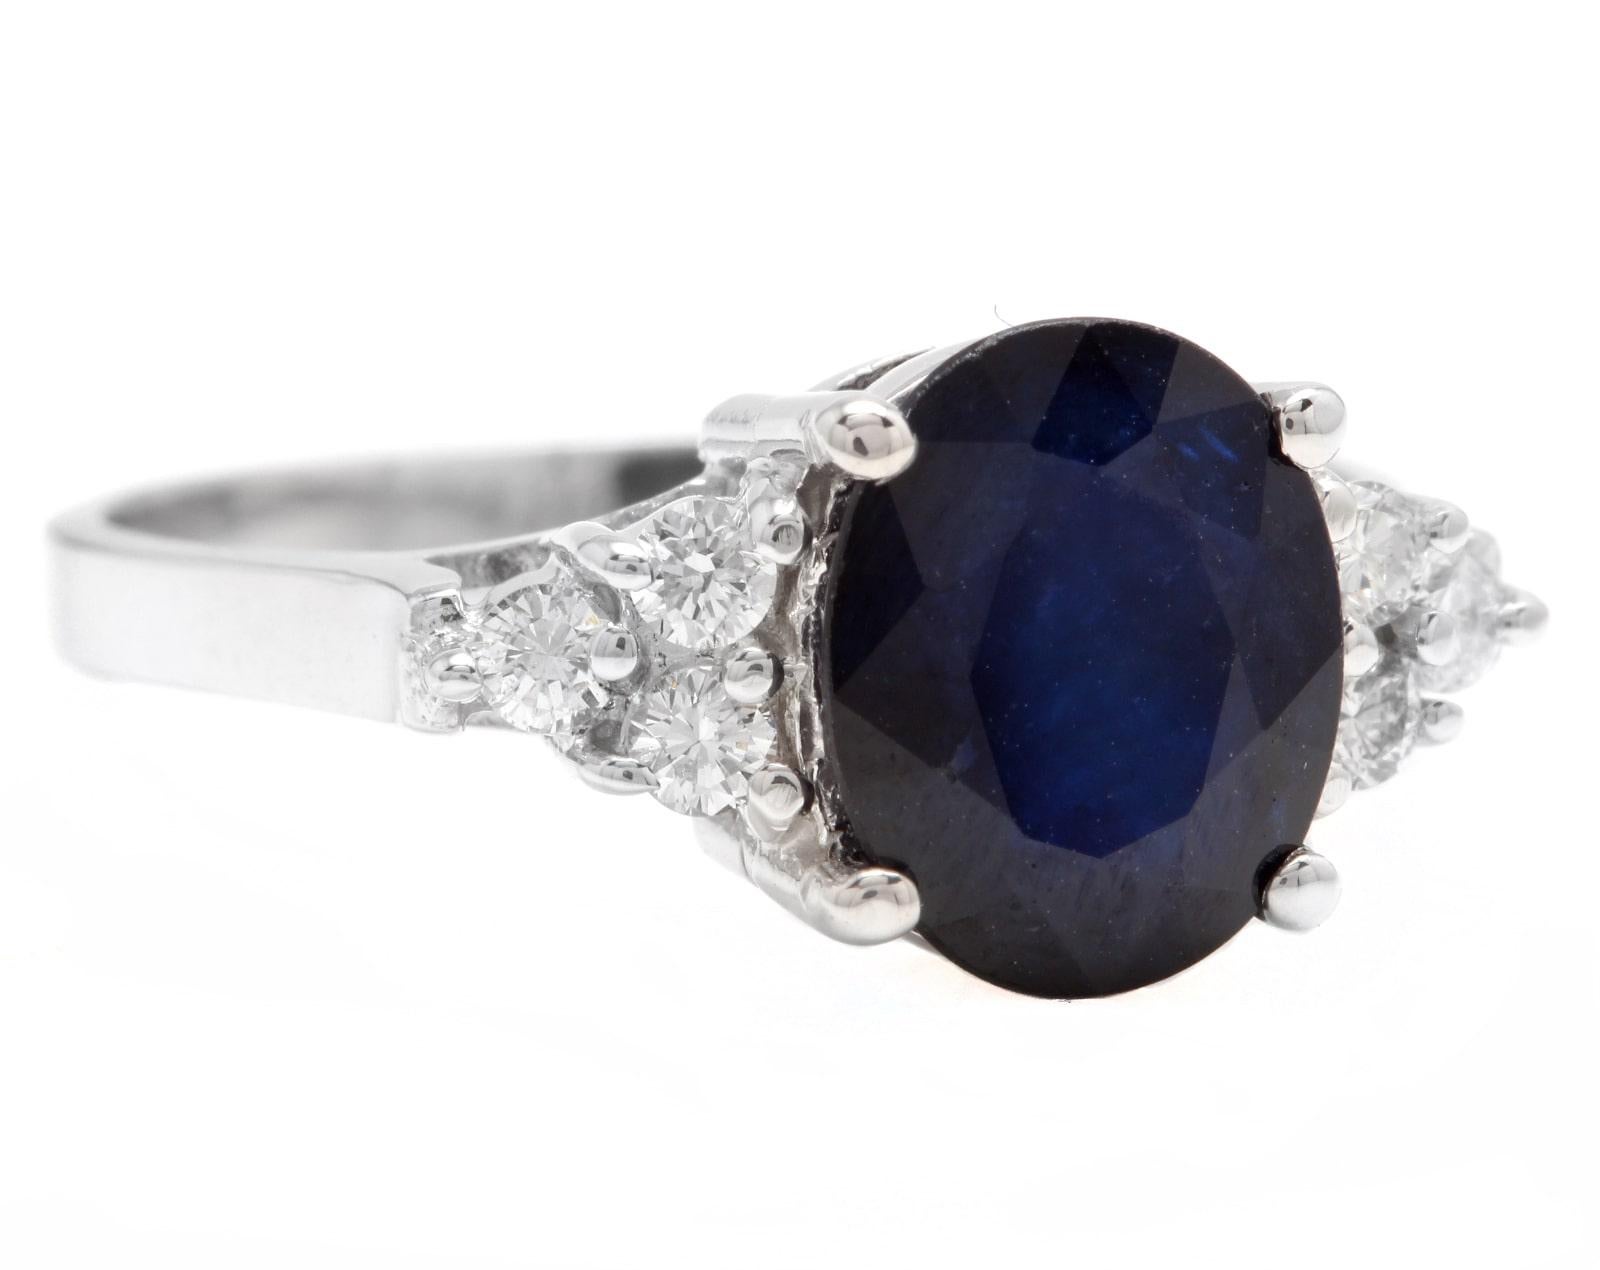 5.75 Carats Exquisite Natural Blue Sapphire and Diamond 14K Solid White Gold Ring

Total Natural Blue Sapphire Weights: Approx. 5.50 Carats

Sapphire Measures: 10 x 8.00mm

Sapphire Treatment: Diffusion

Natural Round Diamonds Weight: .25 Carats